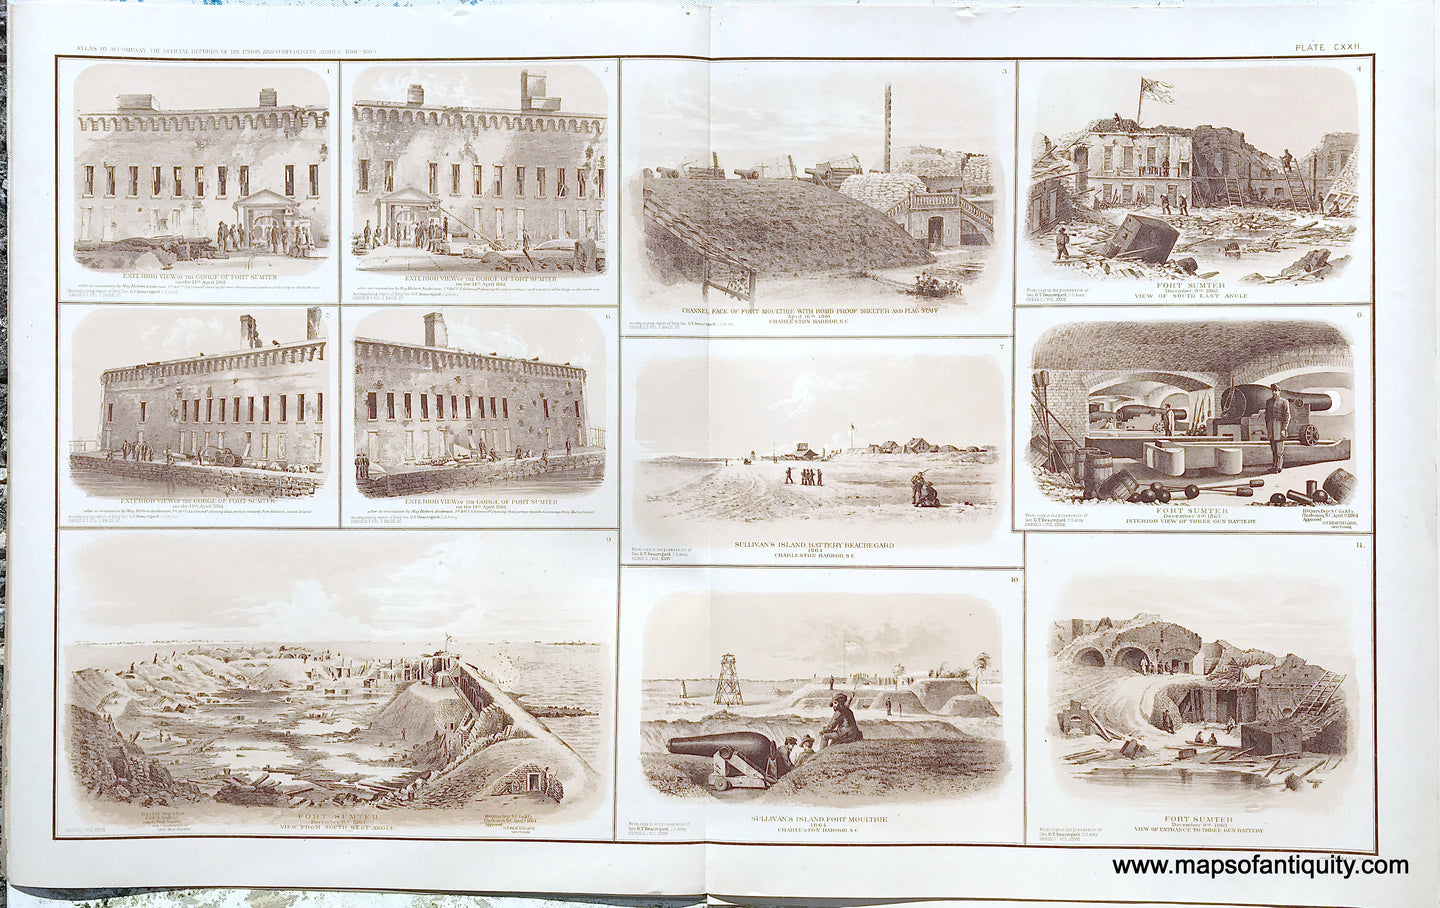 Antique-Lithograph-Print-Plate-122.-Eleven-photographic-views---eight-of-Fort-Sumter-three-of-Fort-Moultrie-and-Battery-Beauregard-Charleston-S.C.-1864.-1894-US-War-Dept.-Civil-War-Civil-War-1800s-19th-century-Maps-of-Antiquity